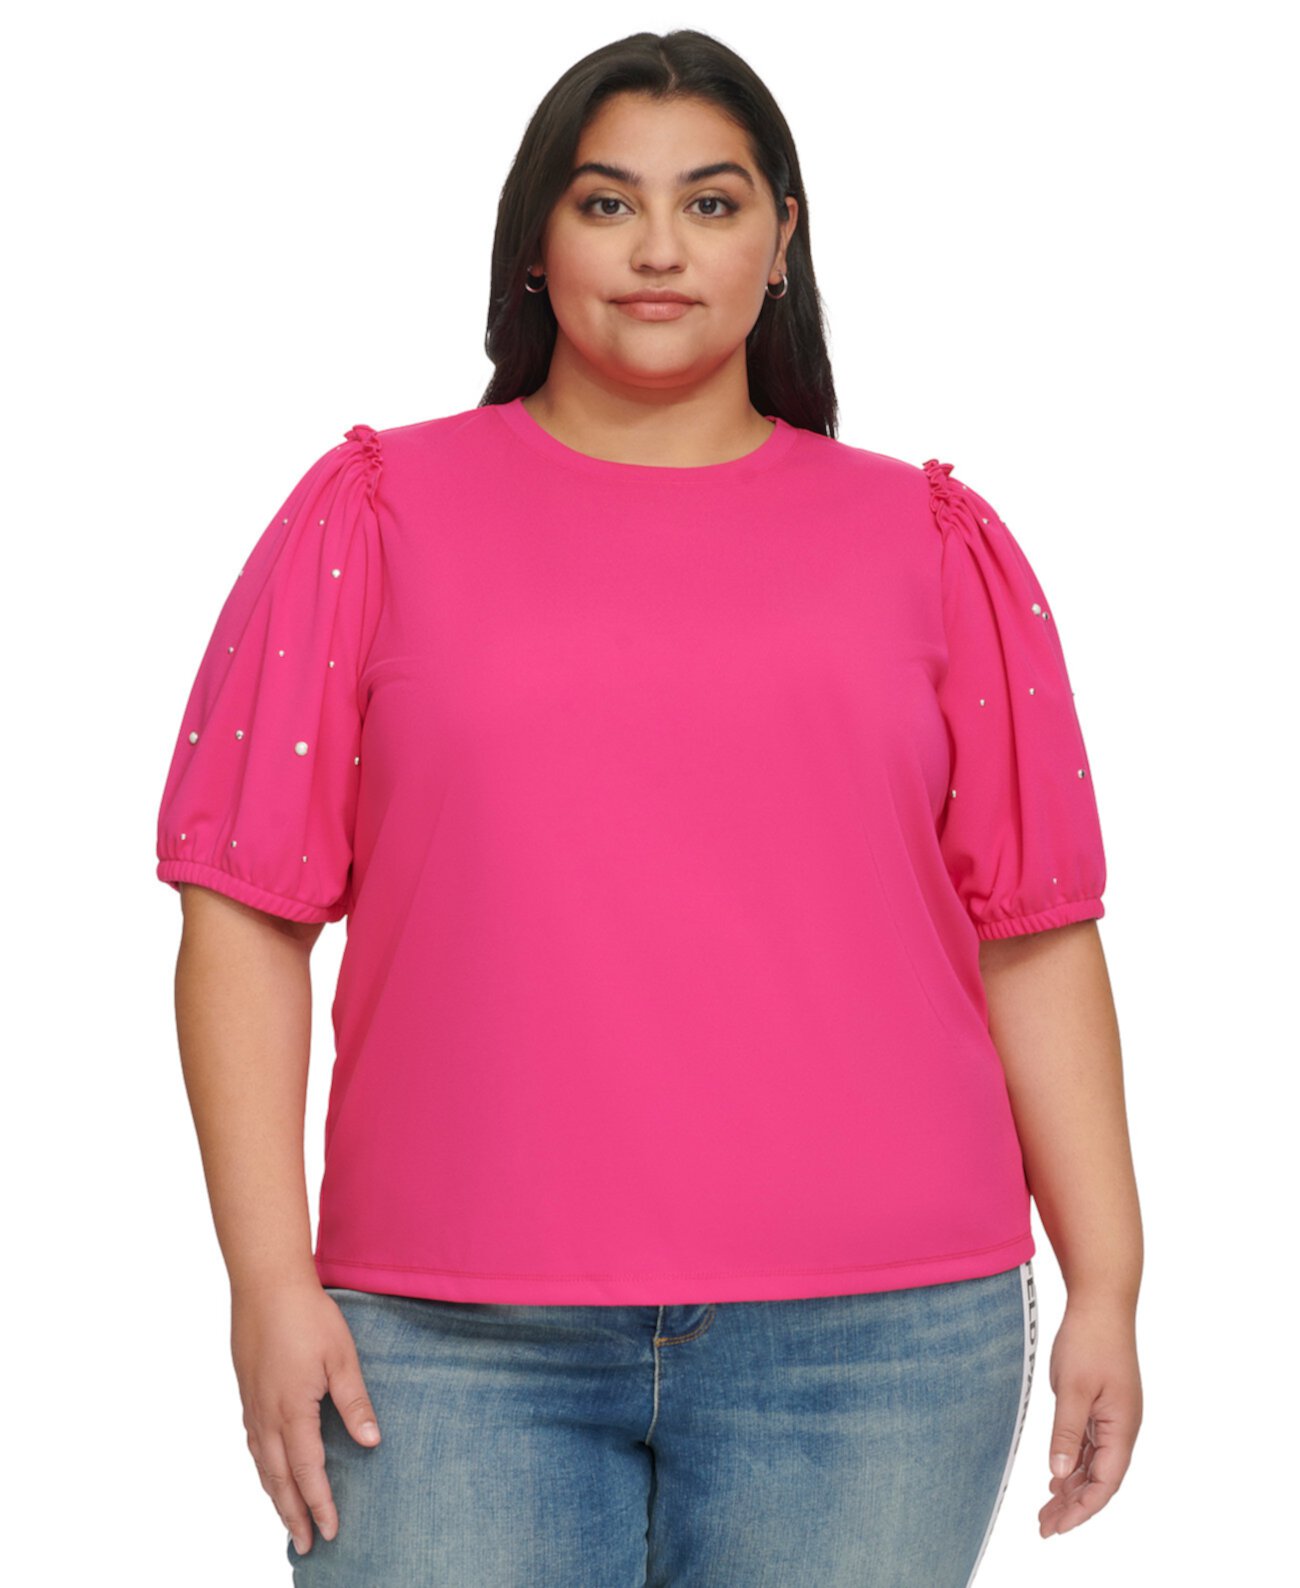 Women's Plus Size Embellished Puff Sleeve Top, First@Macy’s Karl Lagerfeld Paris